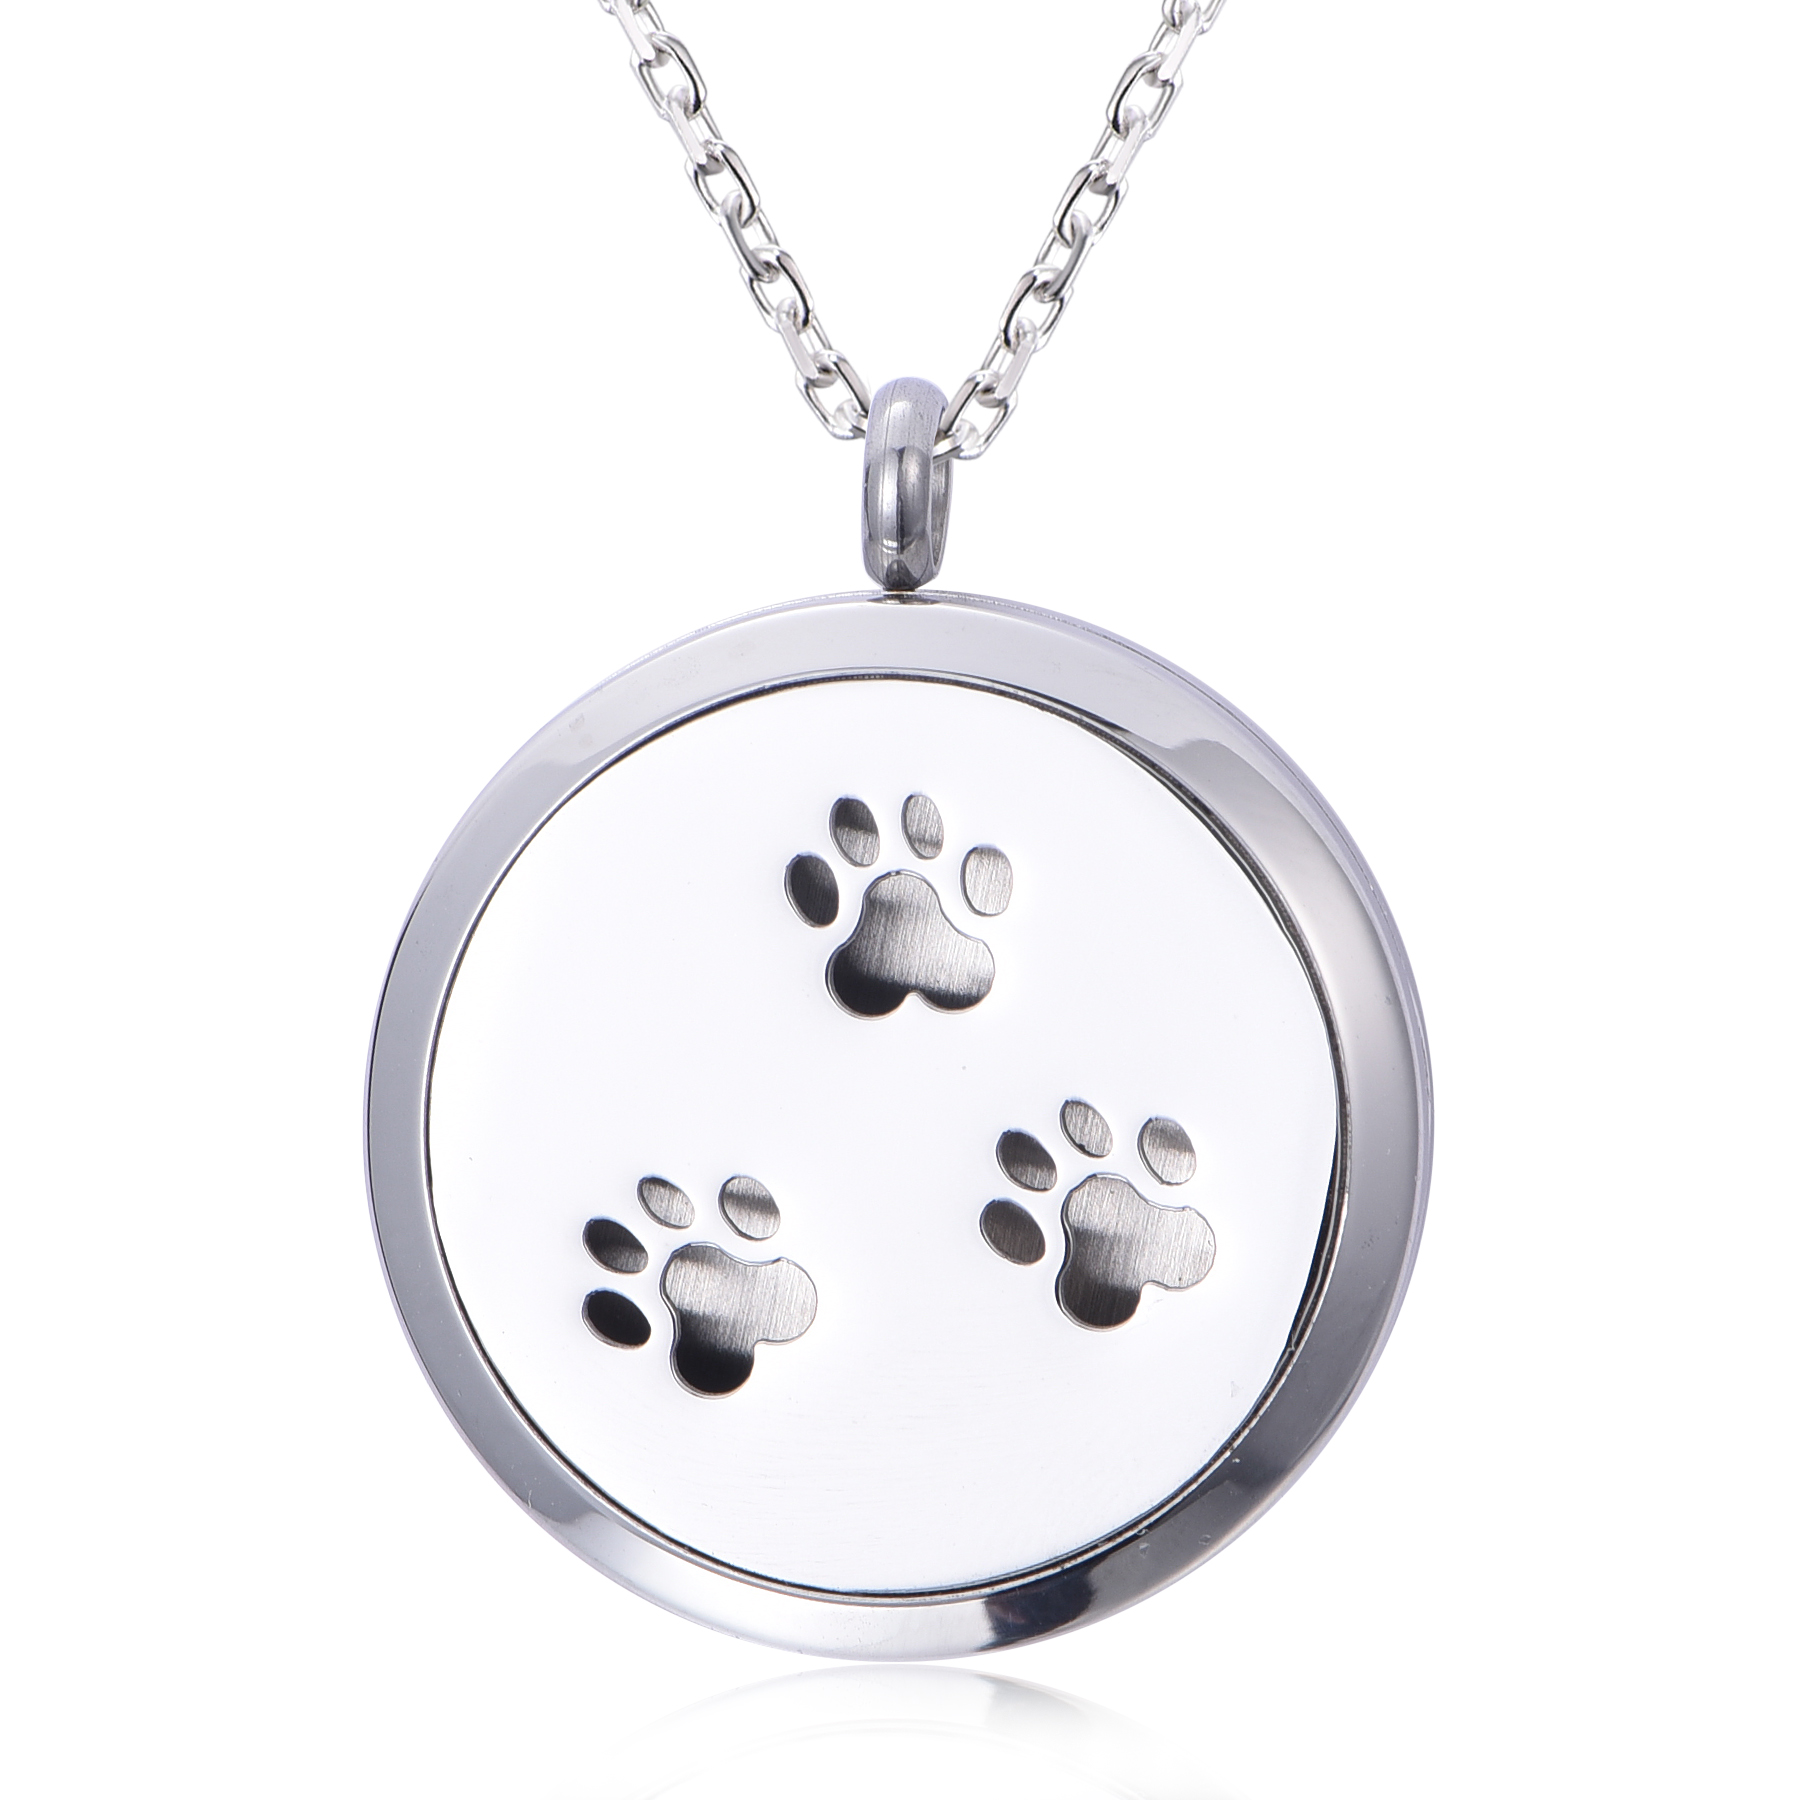 Classic Stainless Steel Cute Dog Footprint Perfume Diffuse Locket Pendant Necklace NS10-07